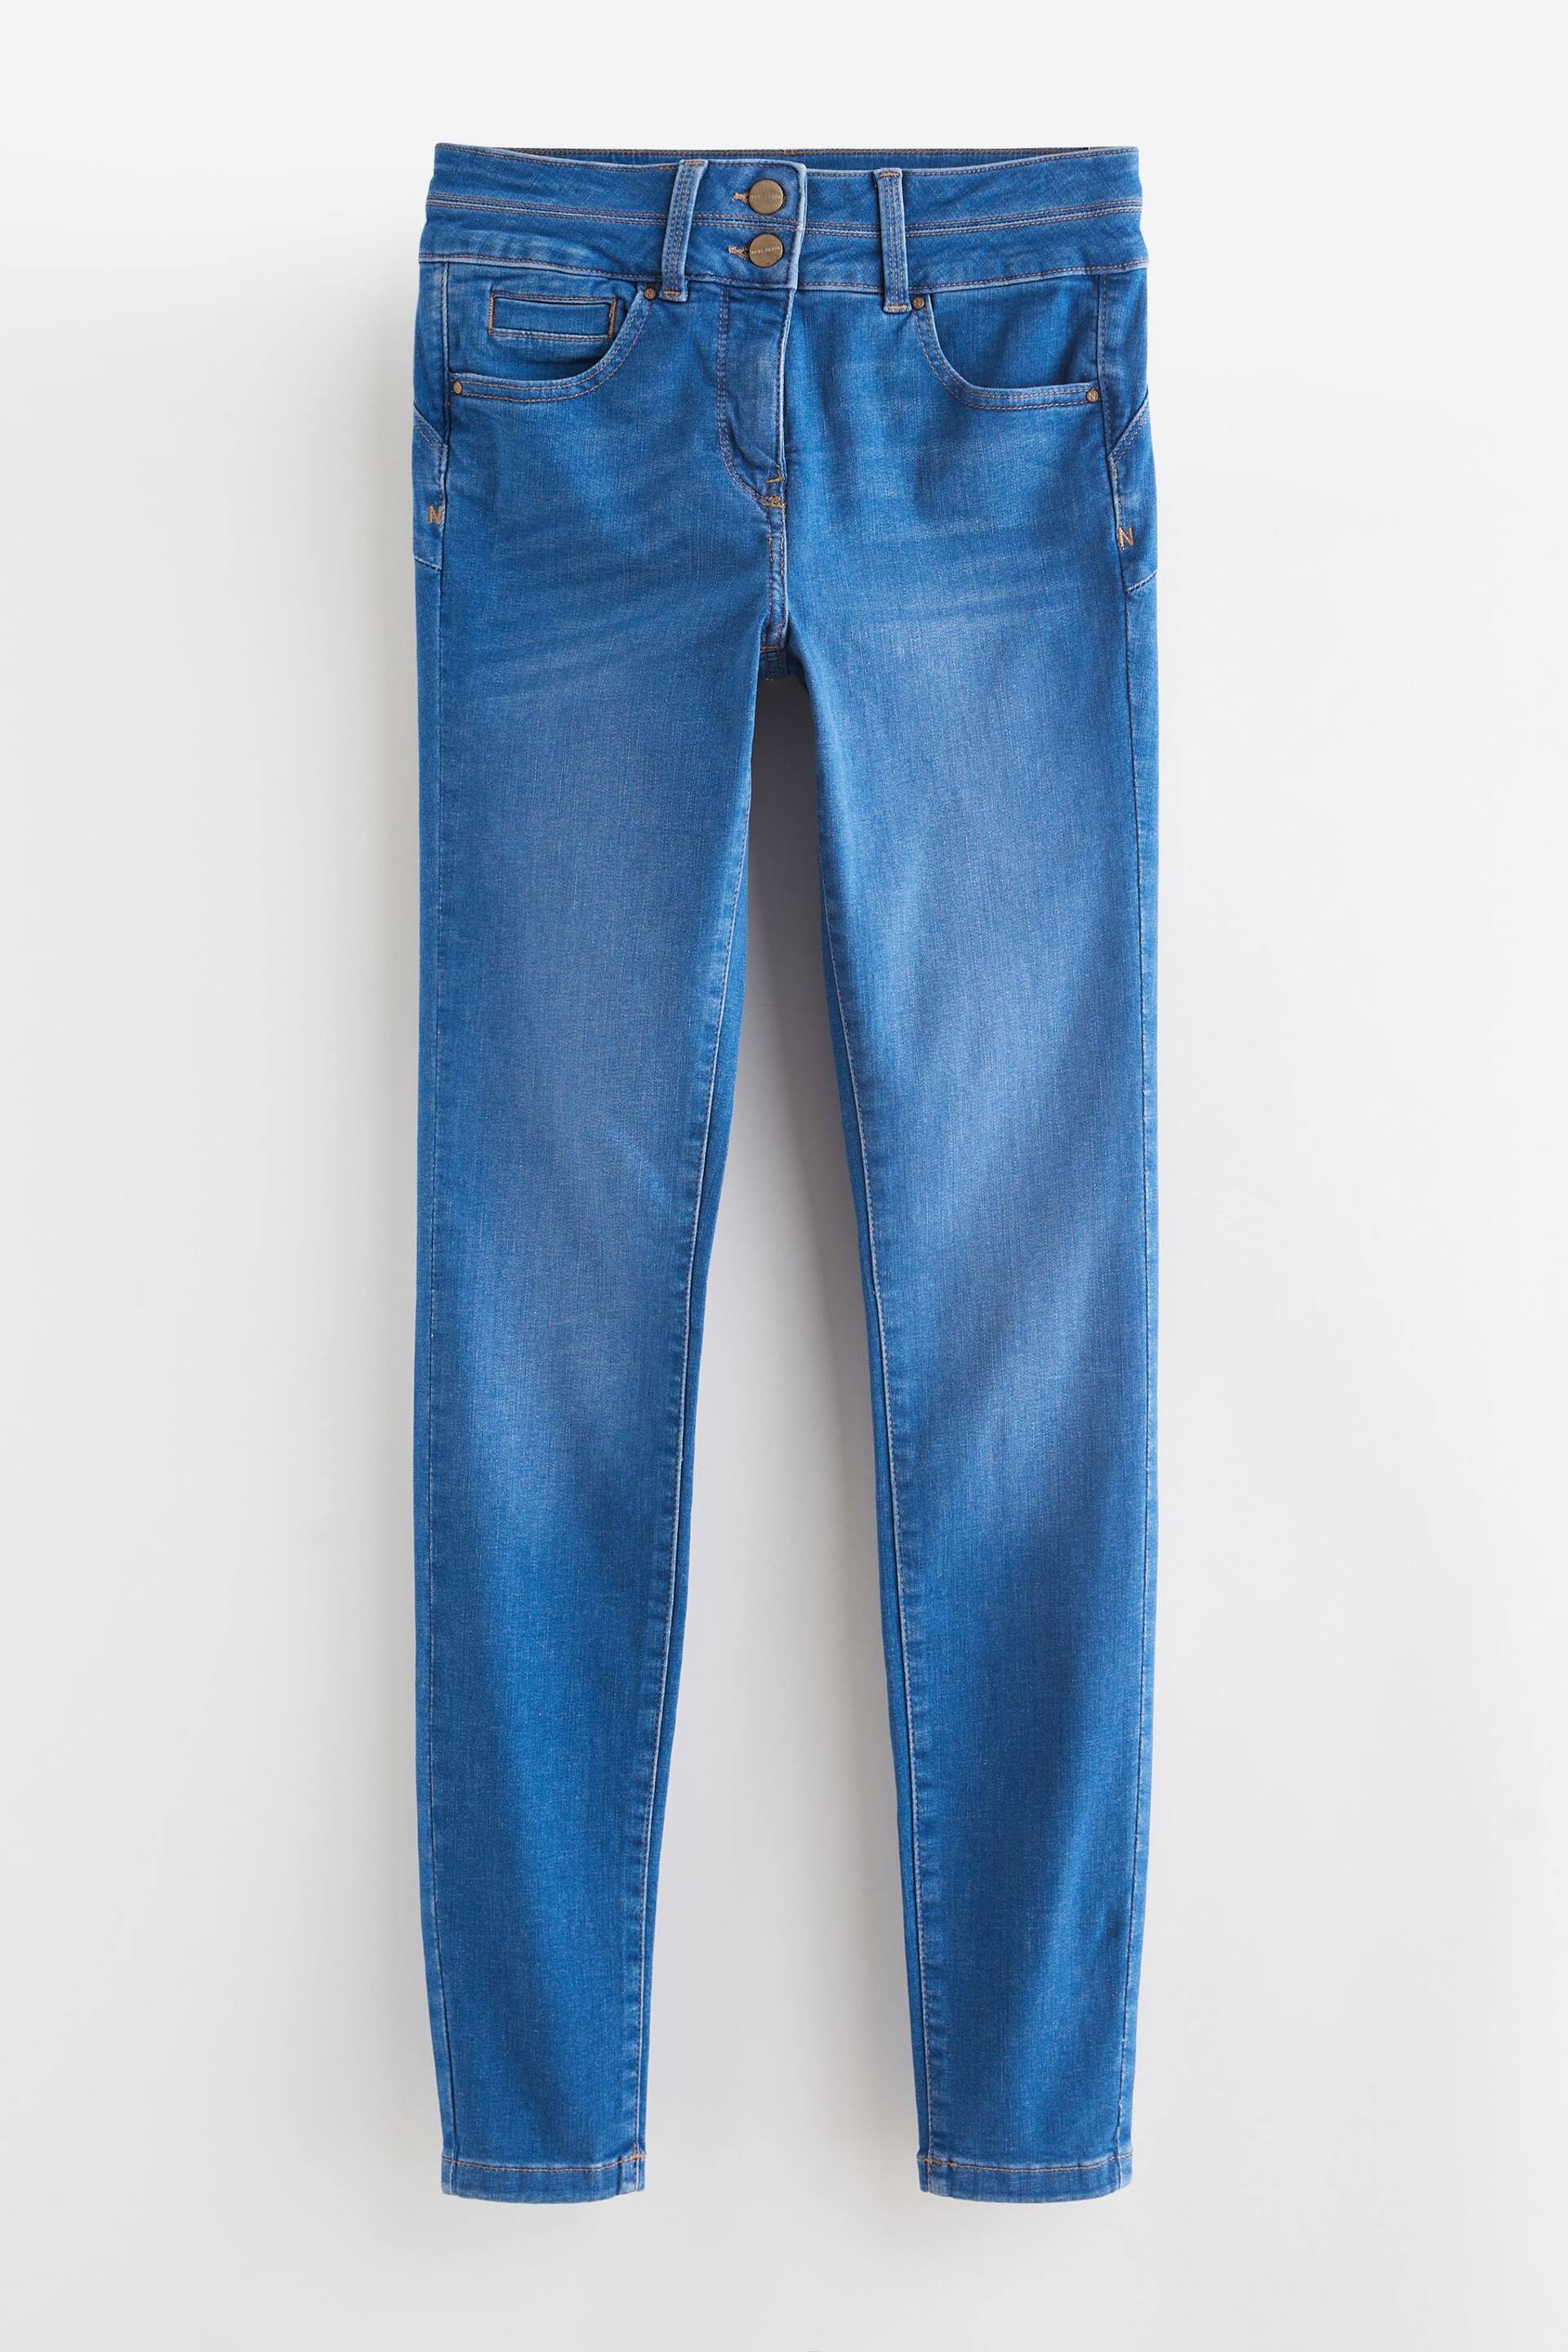 Bright Blue Lift Slim And Shape Skinny Jeans - Image 5 of 6